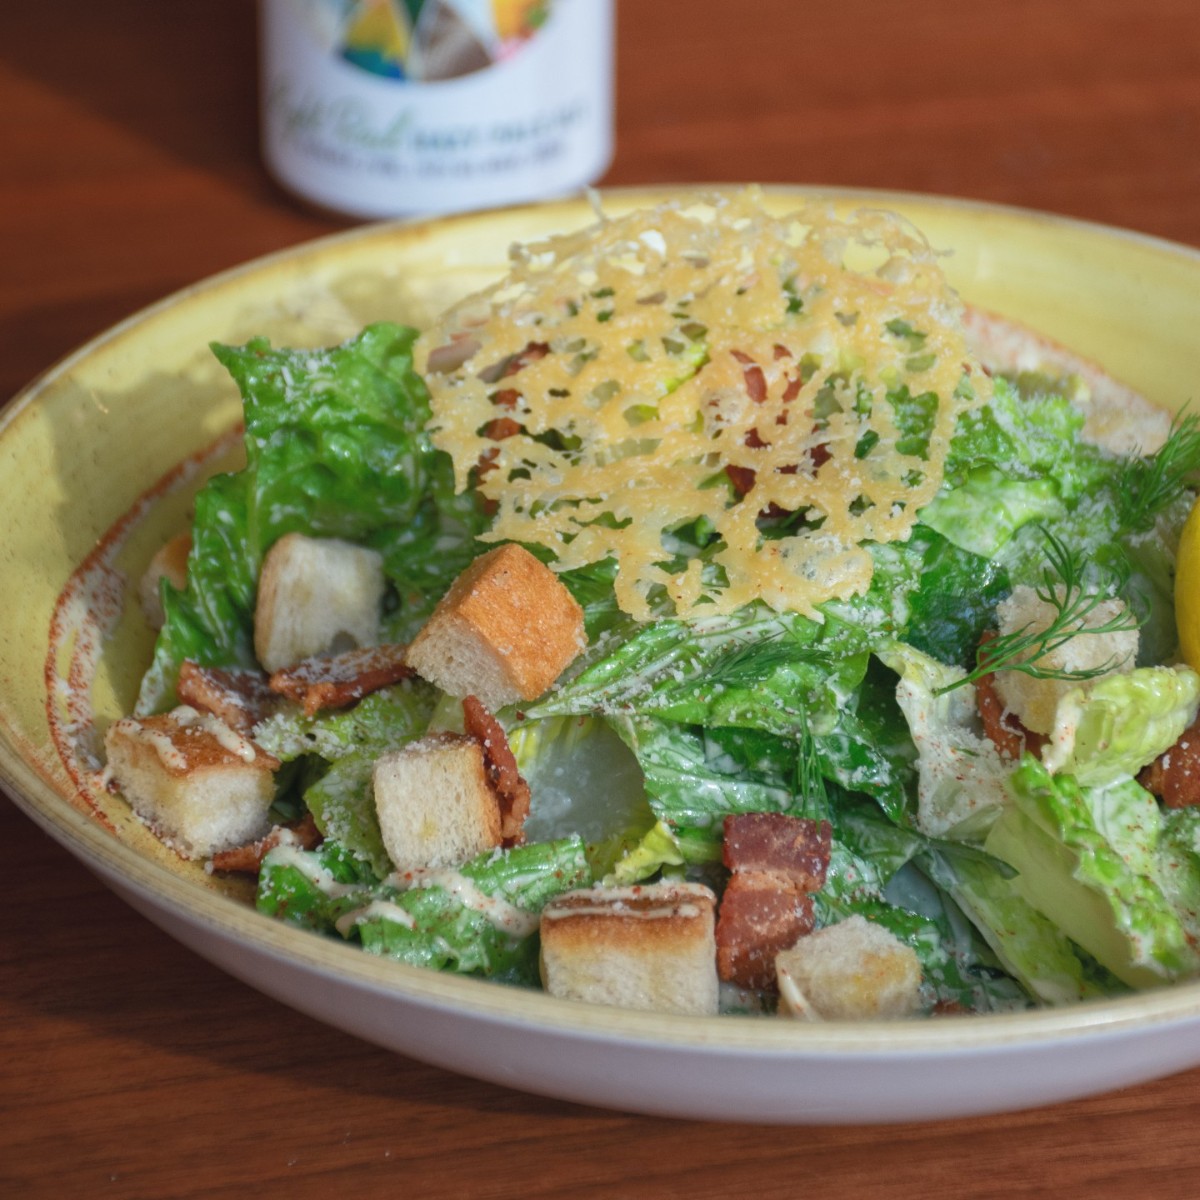 Introducing: Chef Mat's Caesar Salad! Crisp, crunchy, and oh-so-satisfying, it's the perfect pick-me-up for any day of the week. Romaine lettuce, house dressing, croutons, bacon lardons, fresh dill, crispy gouda